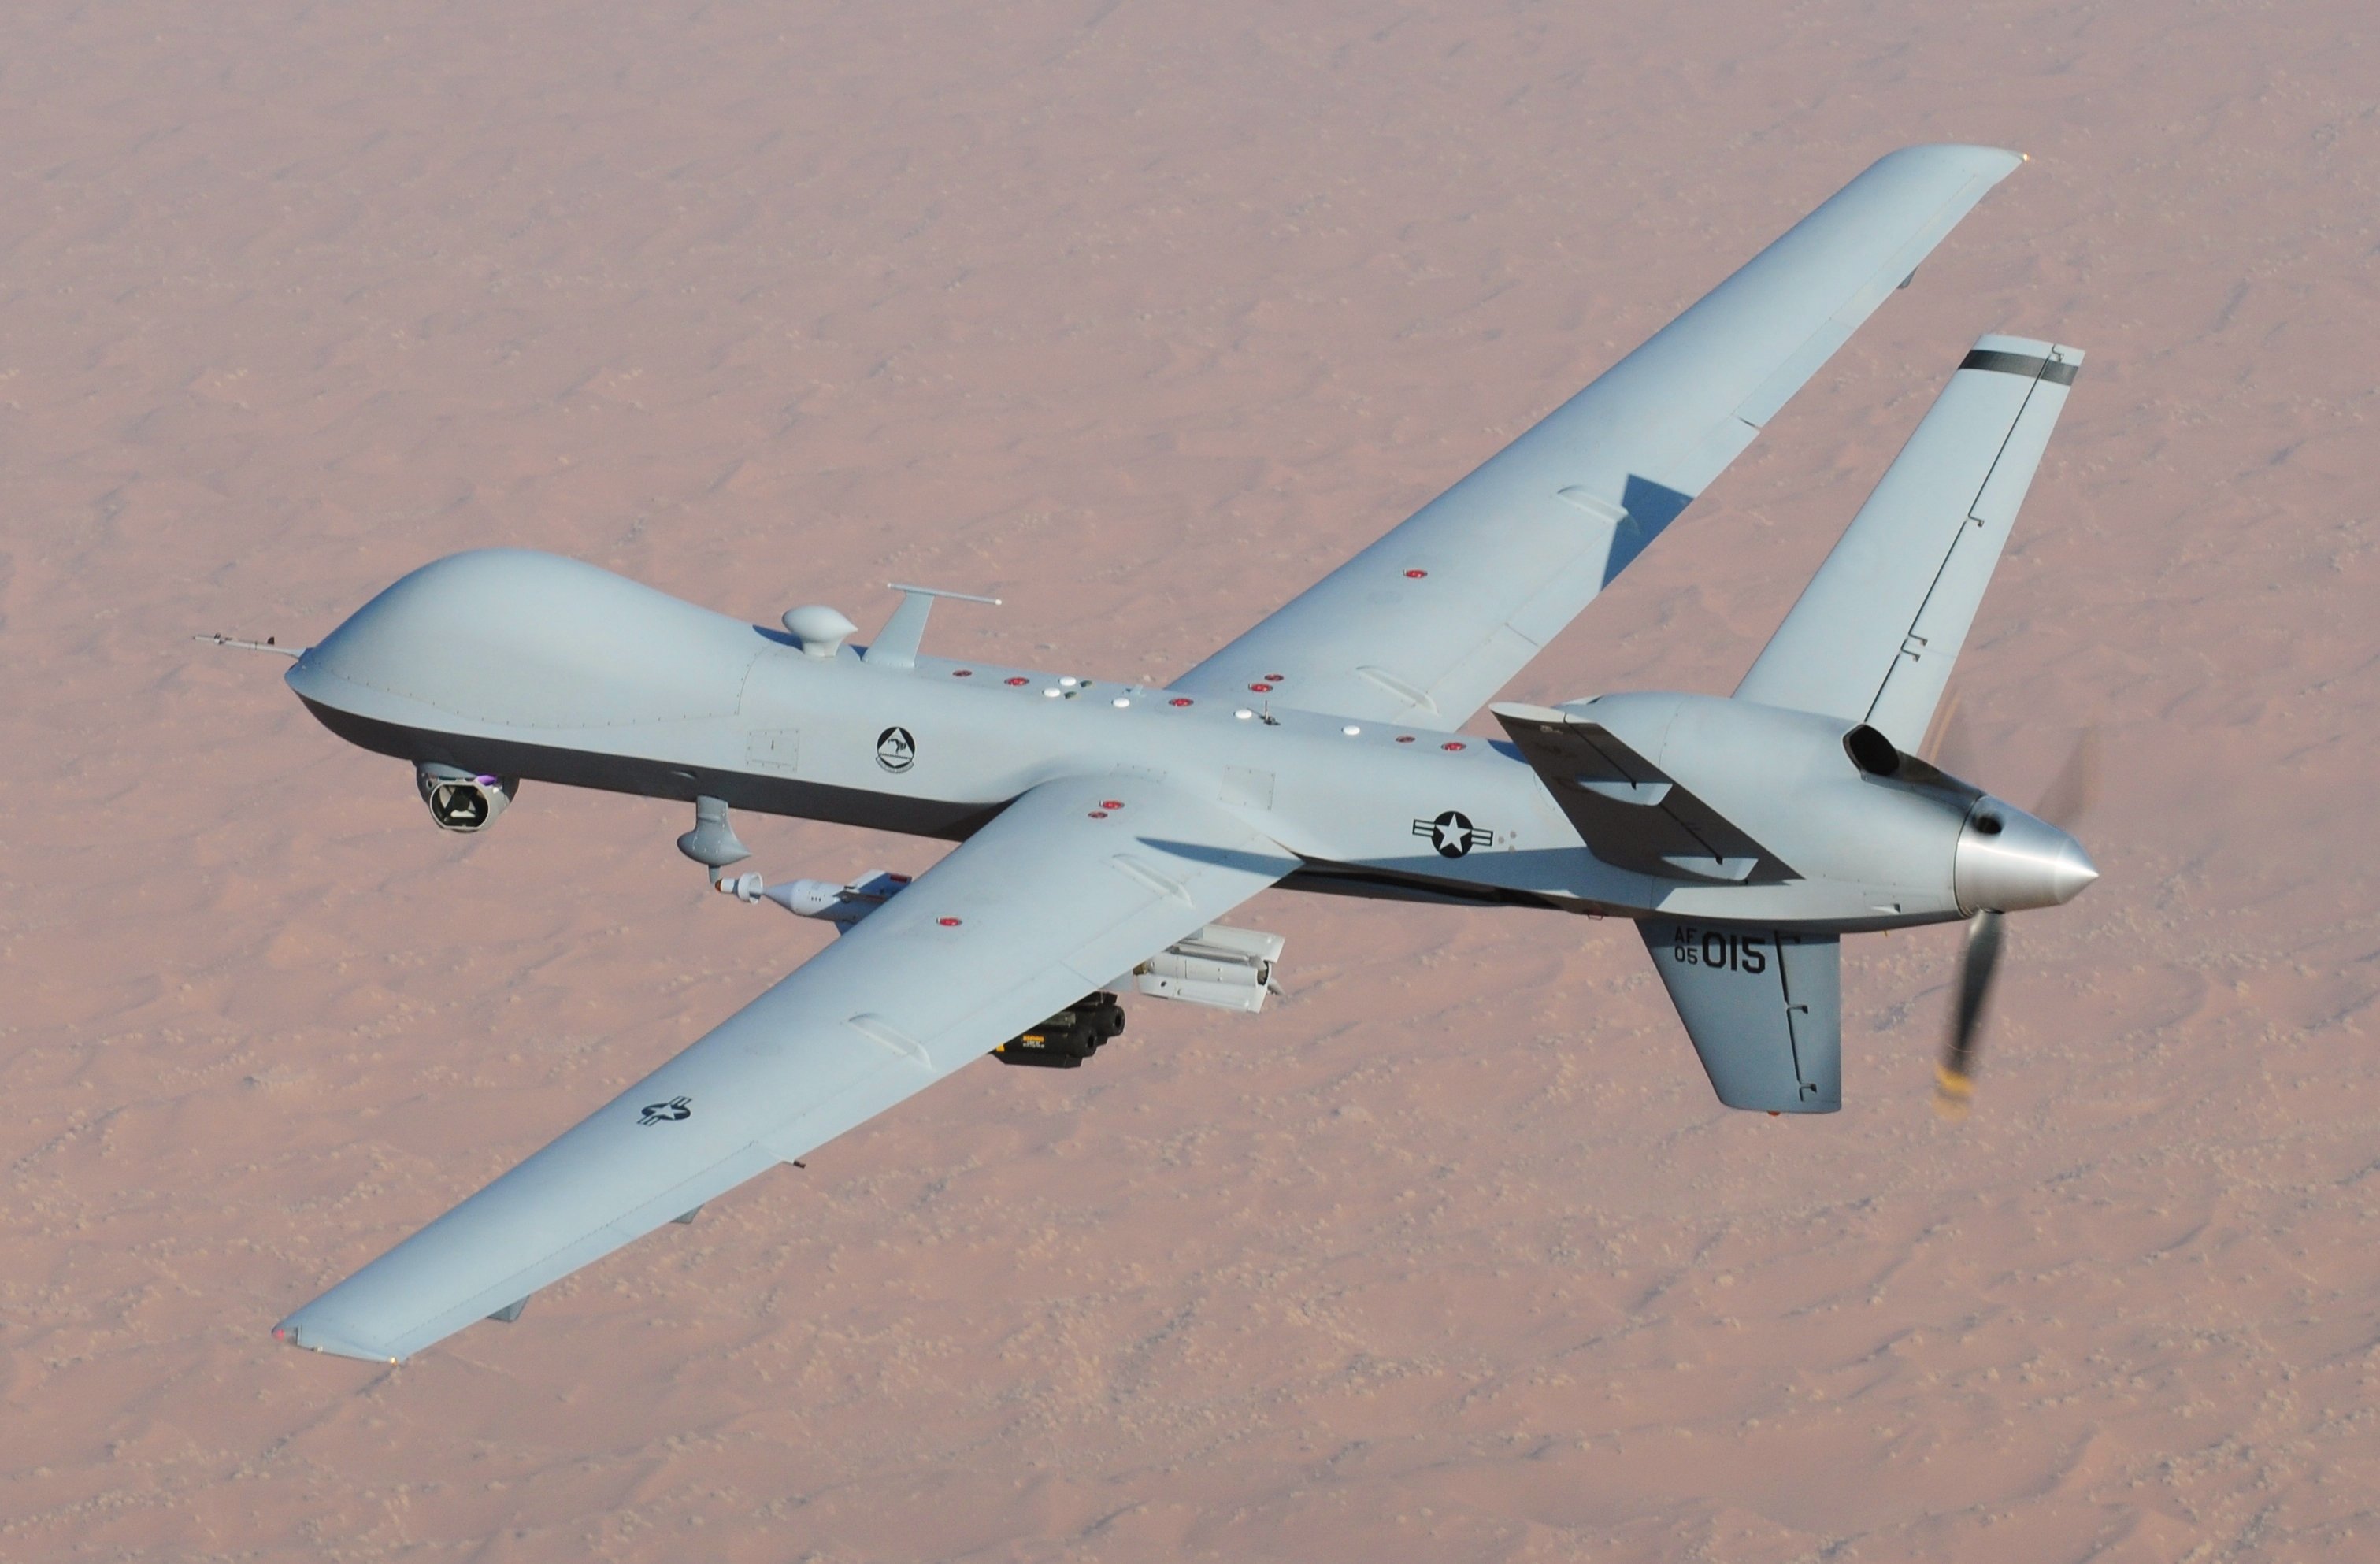 The MQ-9 Reaper UAV is still remotely piloted by humans, but in future conflicts, automated weapons could be a deciding factor, with AI making life-or-death decisions. Source: U.S. Air Force